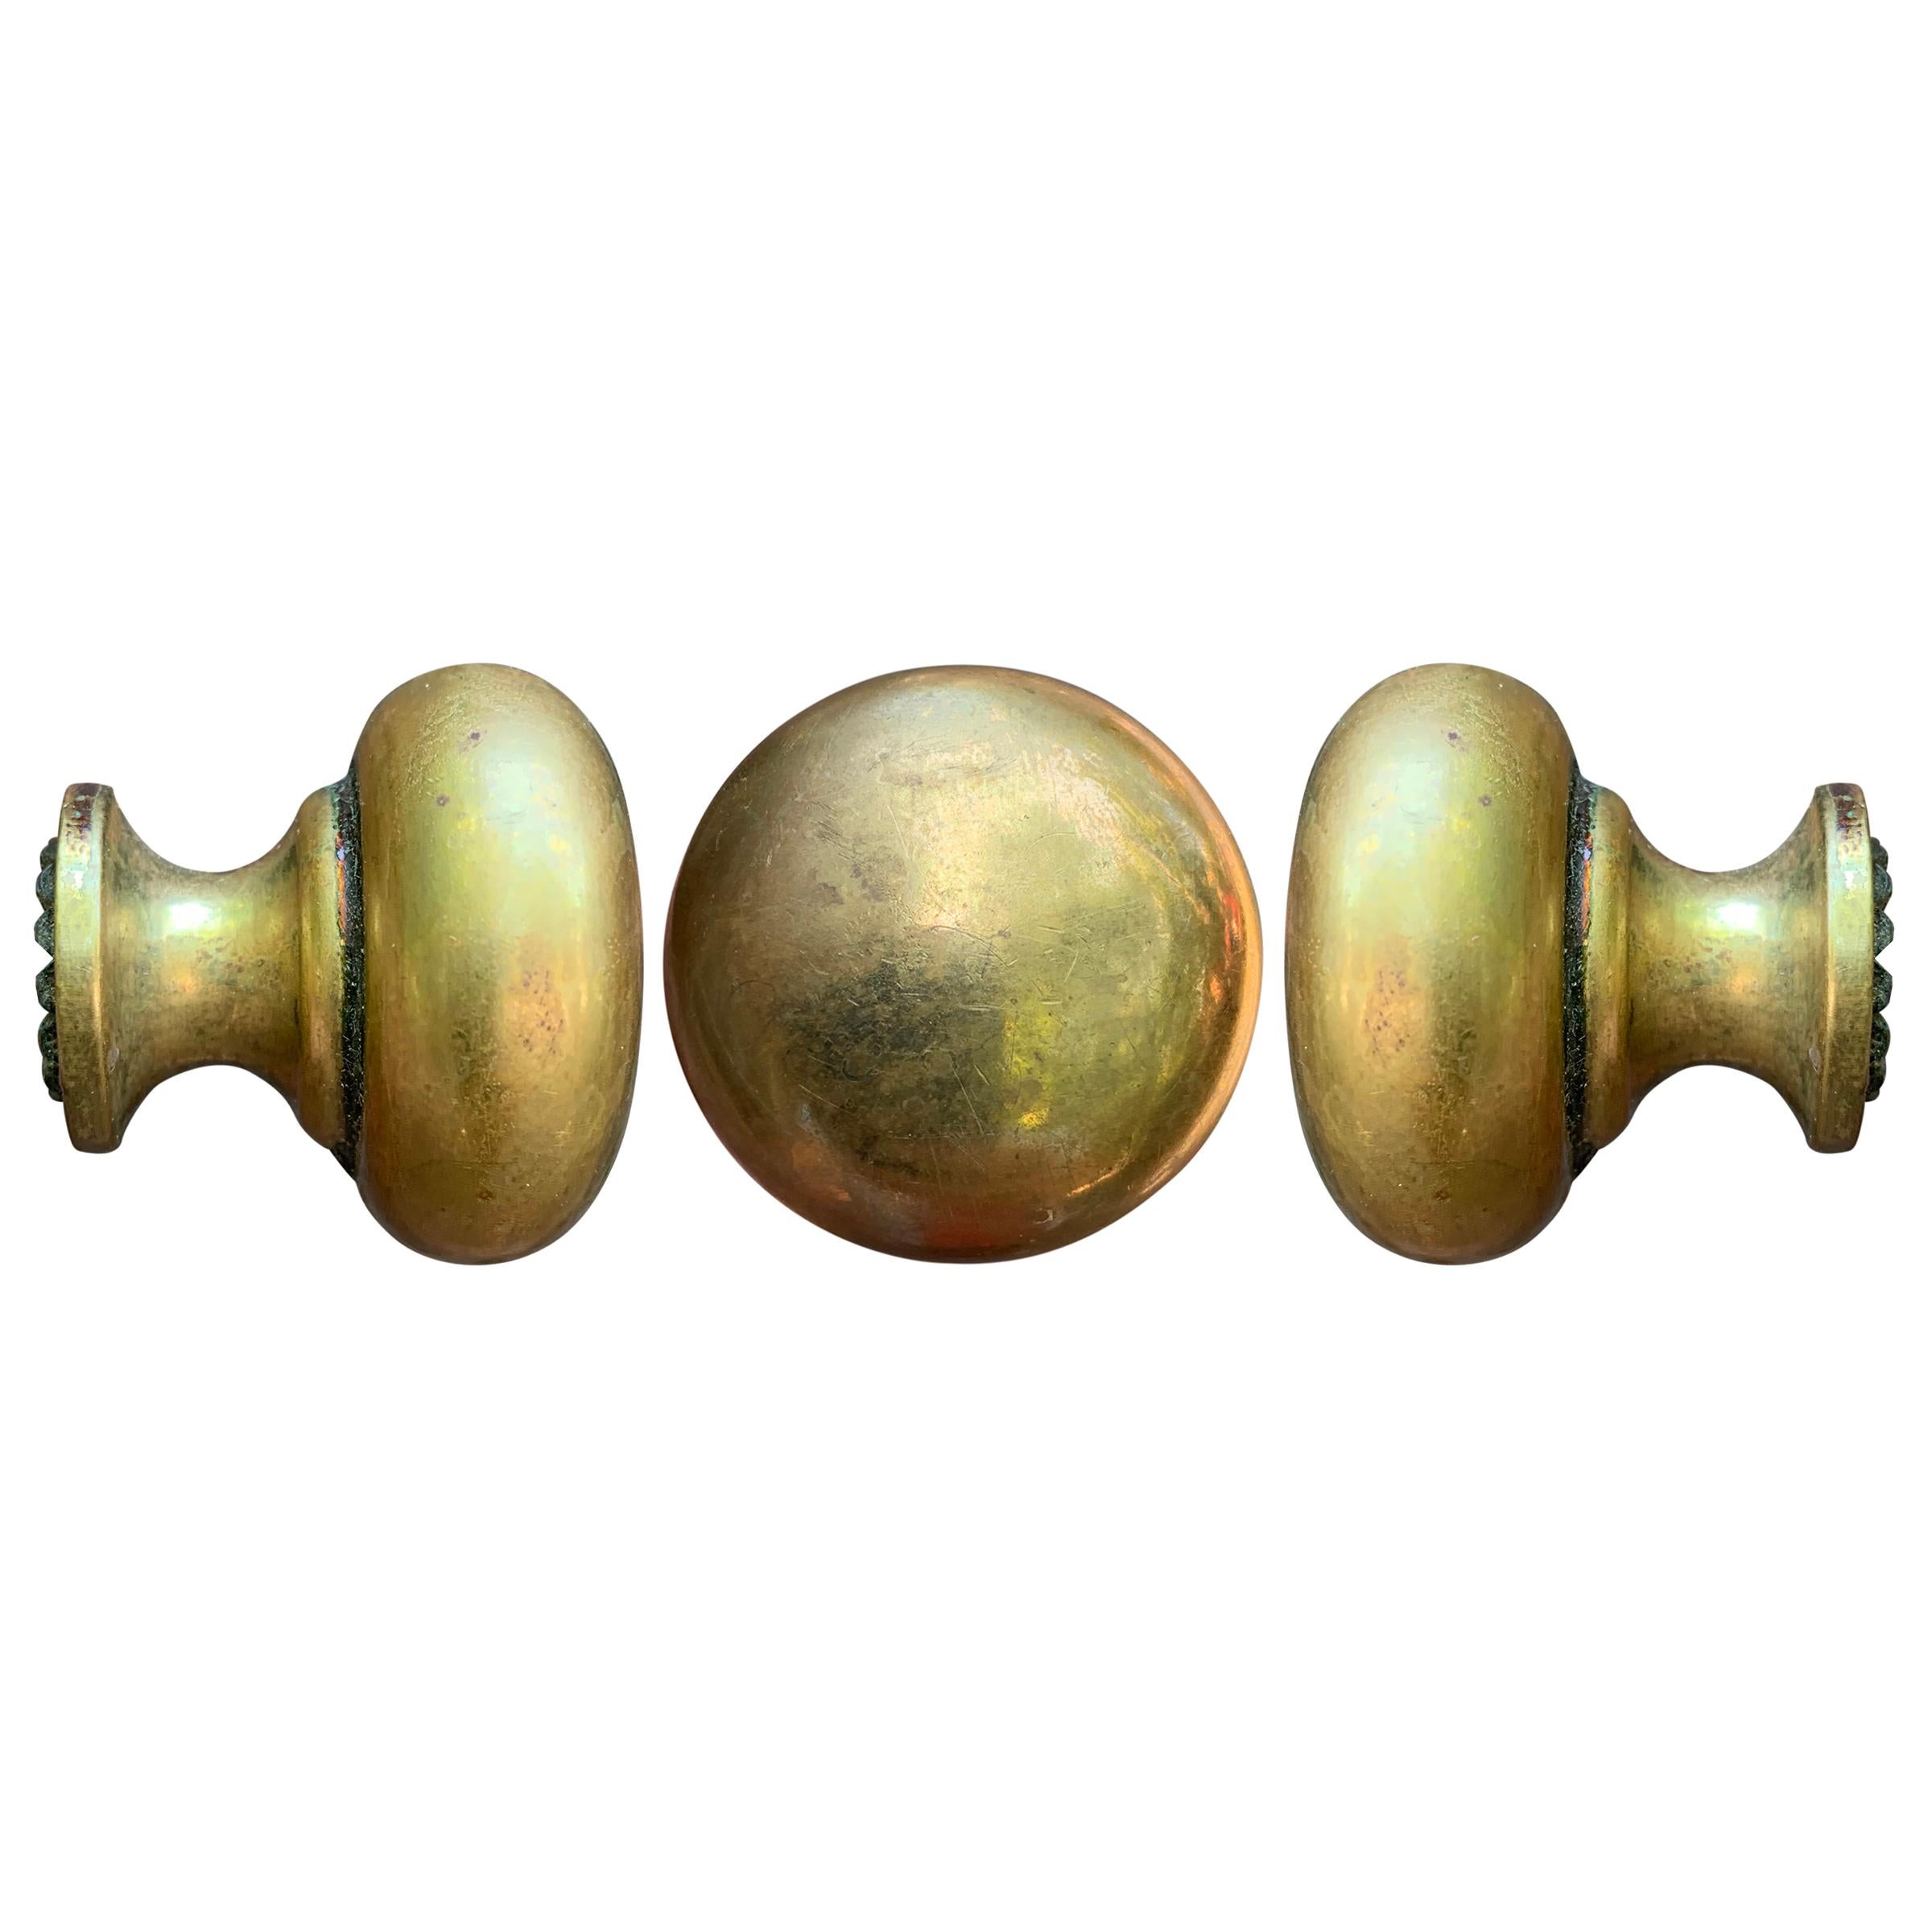 A set of thirty five vintage cast bronze drawer or door knobs perfect for your next kitchen or bathroom project.